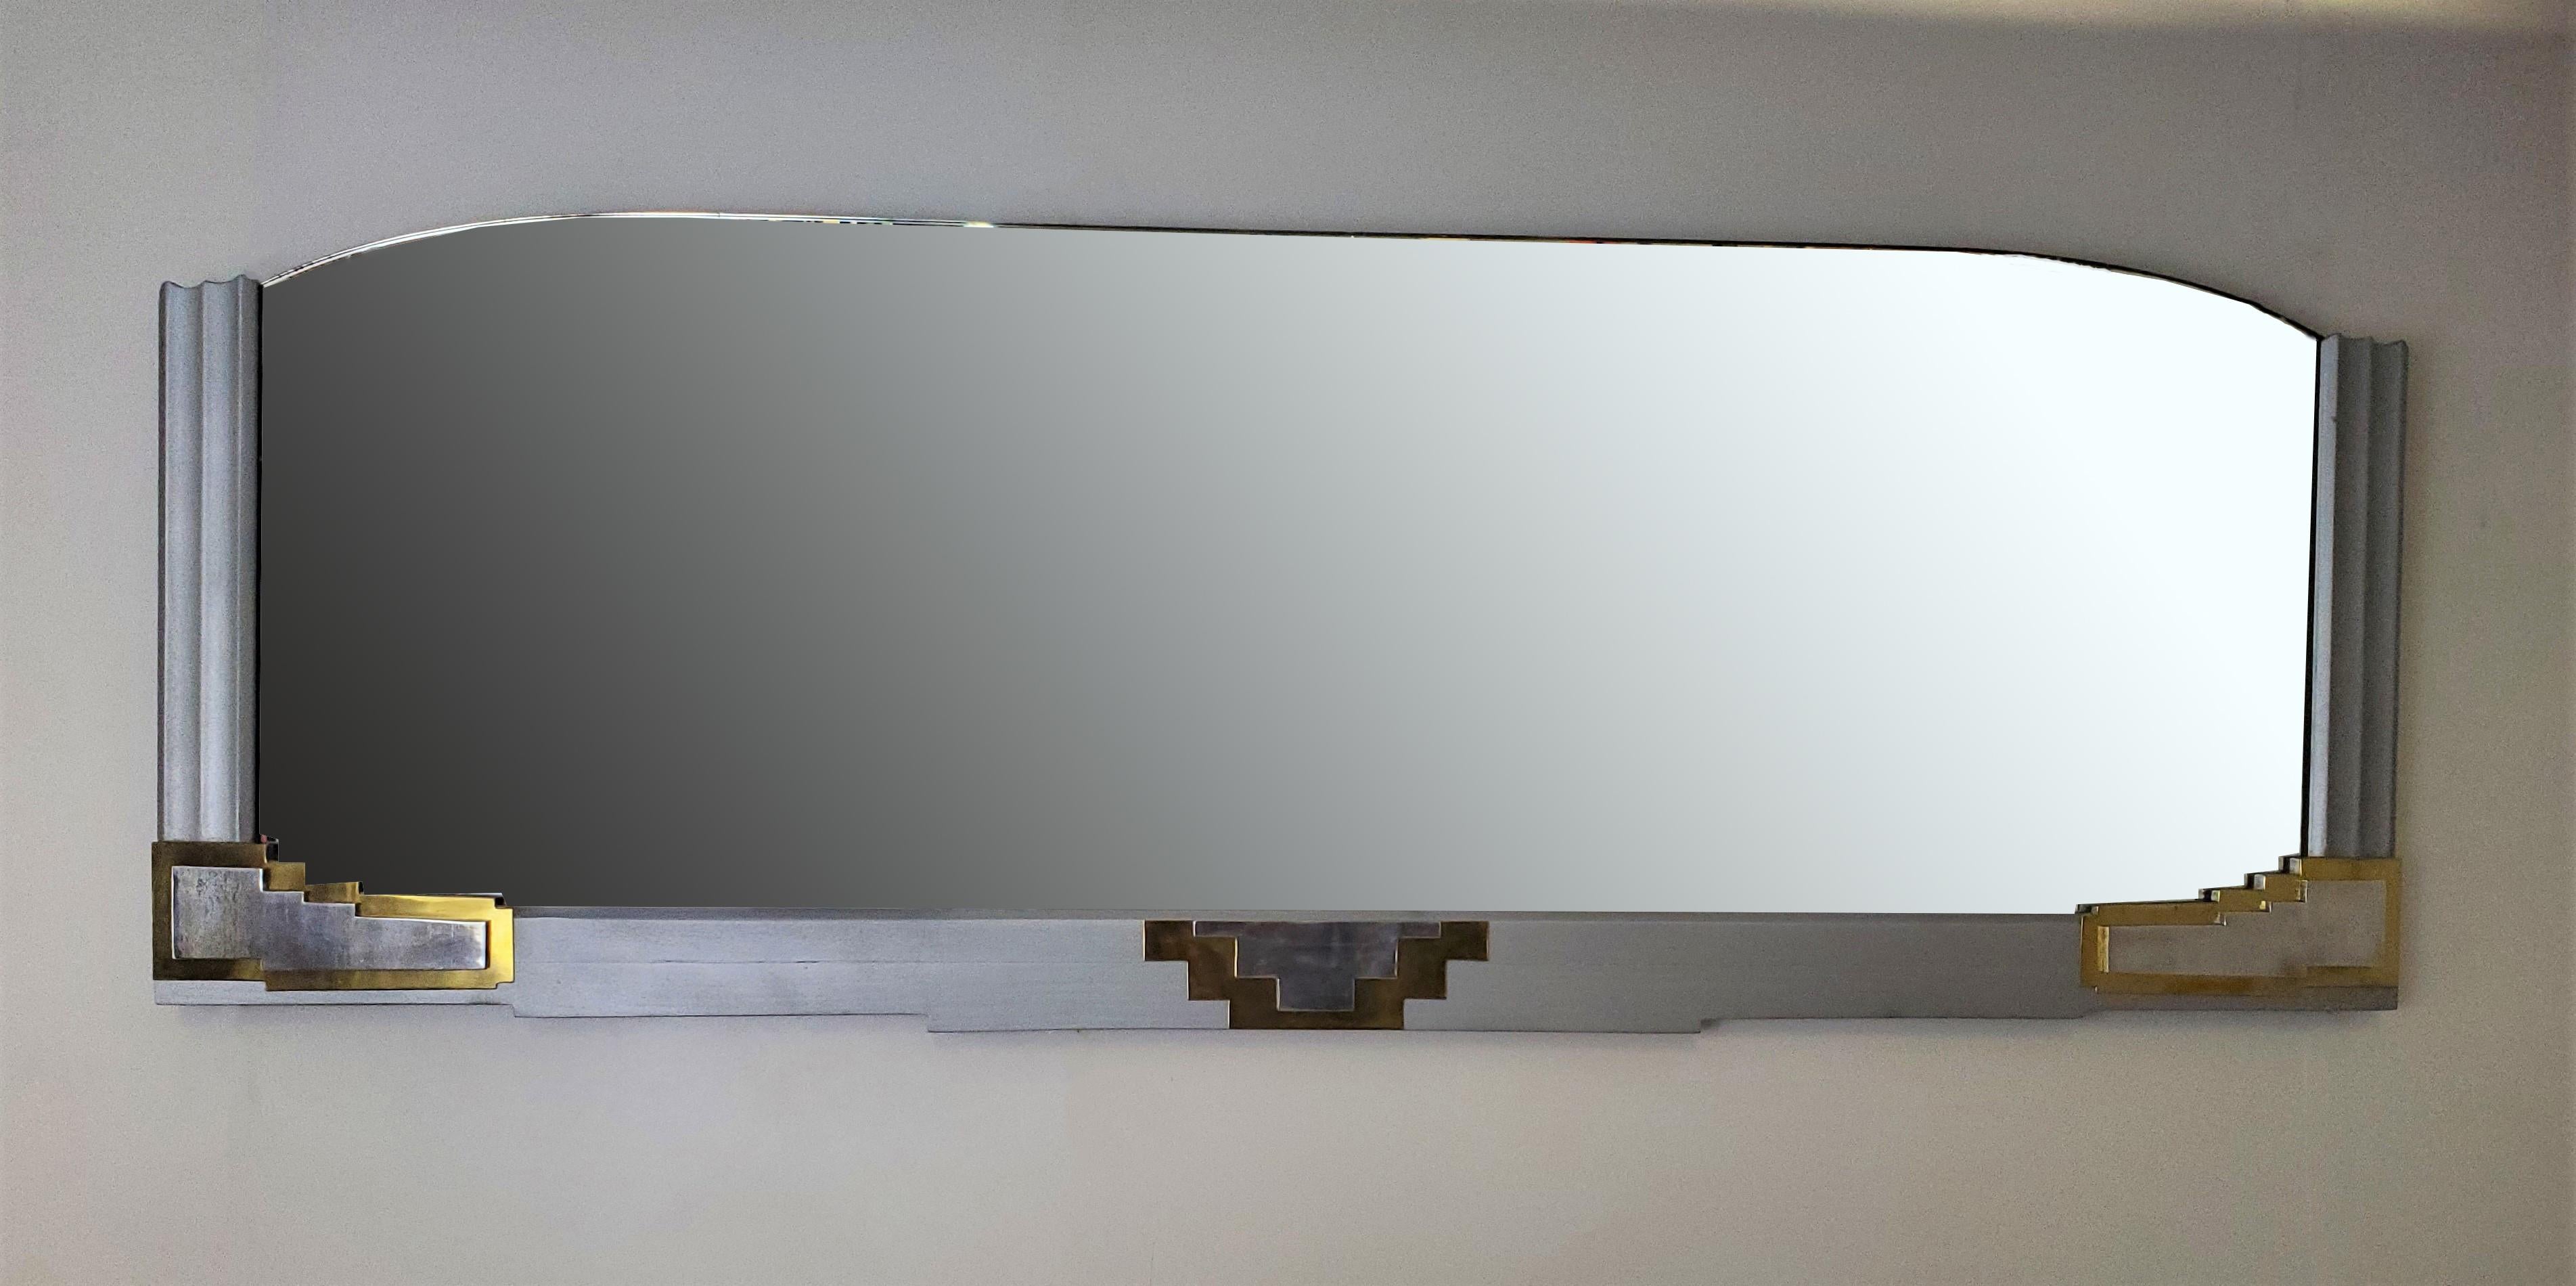 An original French Art Deco long, wide and rectangular, silver over wood 
wall mirror with slightly curved top, fluted sides and angular accents of nickel and brass.
The highly decorative ziggurat, sky scraper, stylized representation on the